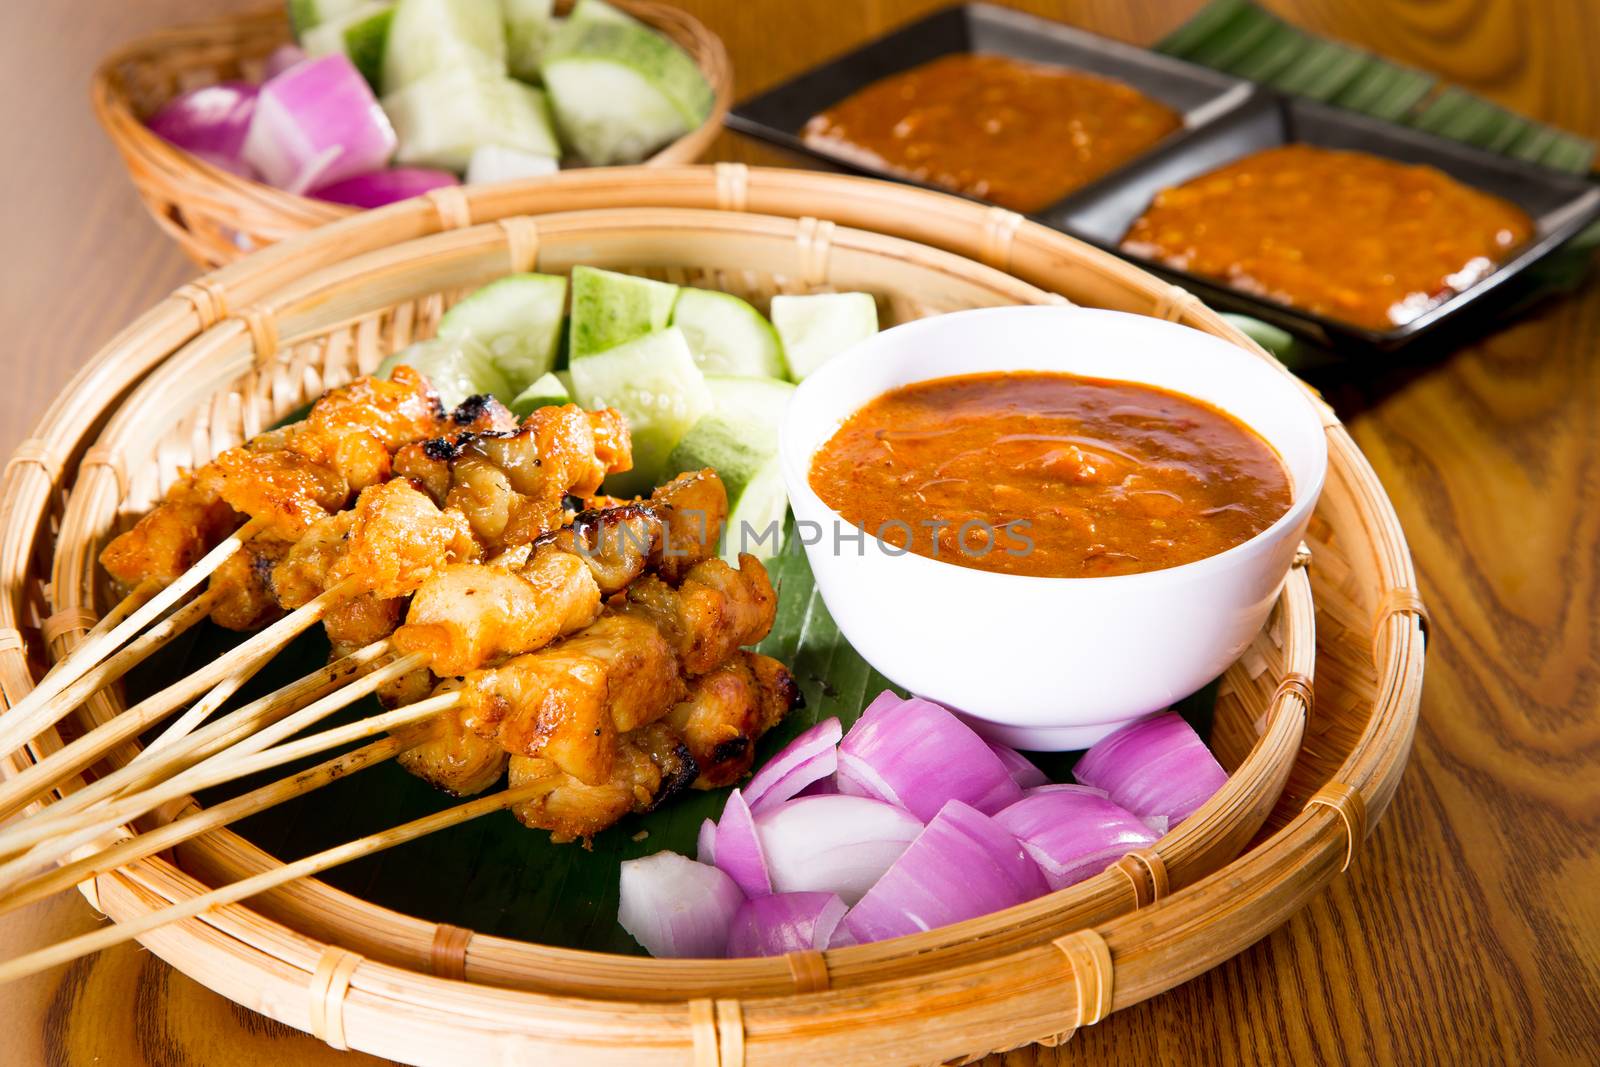 Chicken sate with delicious peanut sauce, ketupat, onion and cucumber on wooden dining table, one of famous local malaysia dishes.